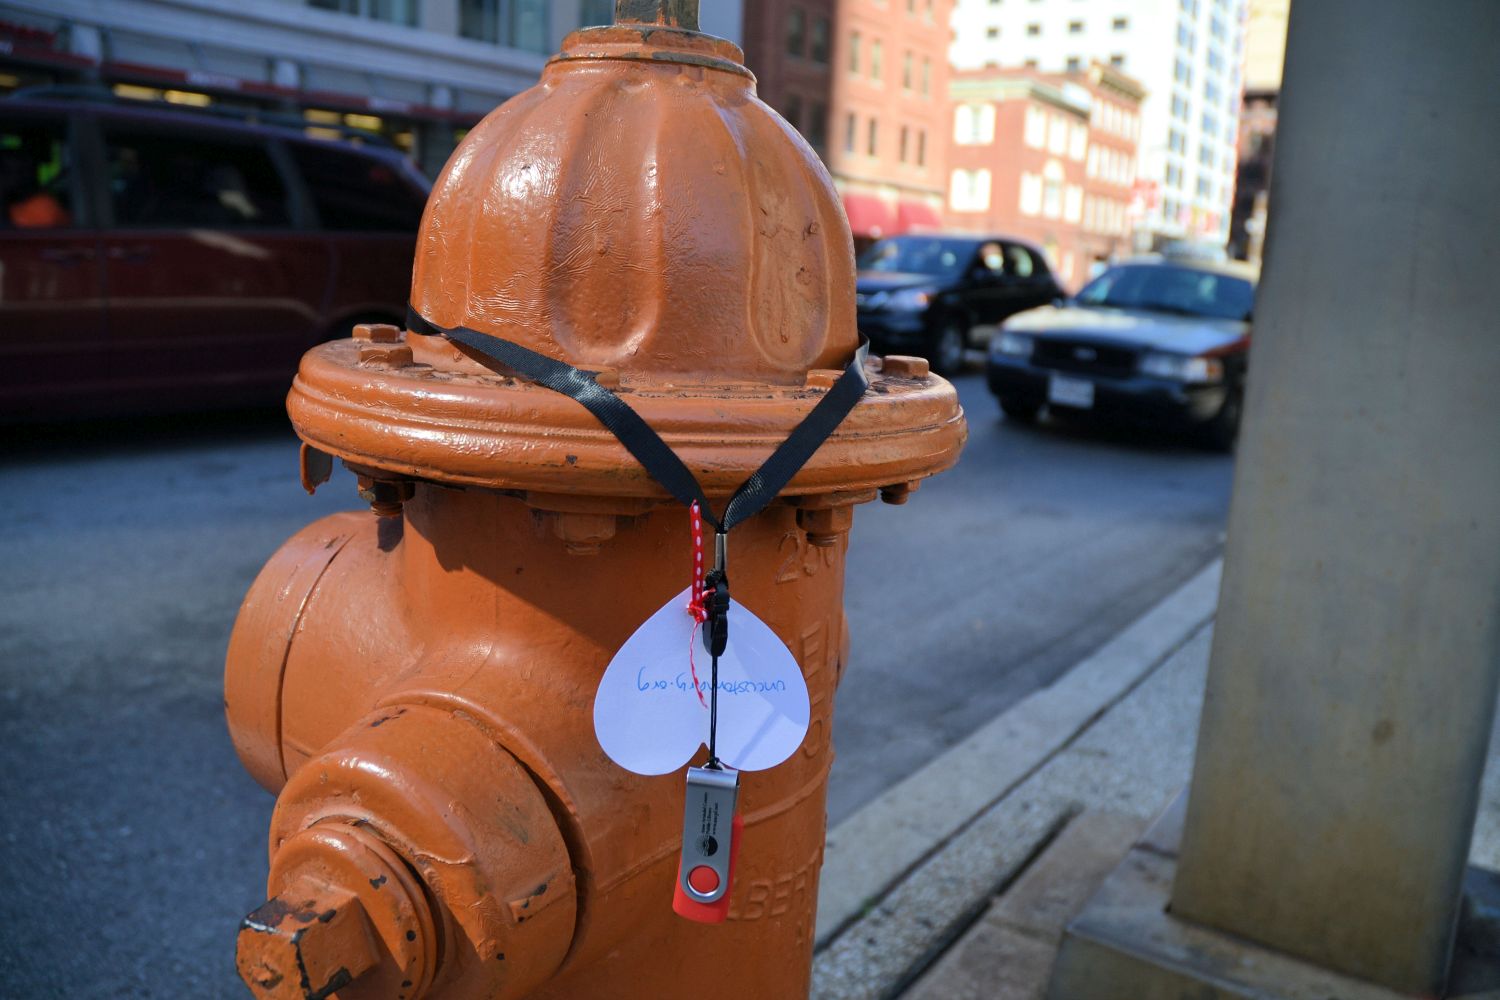 50 Places To Leave Guerrilla Art/Random Acts Of Kindness | Uncustomary